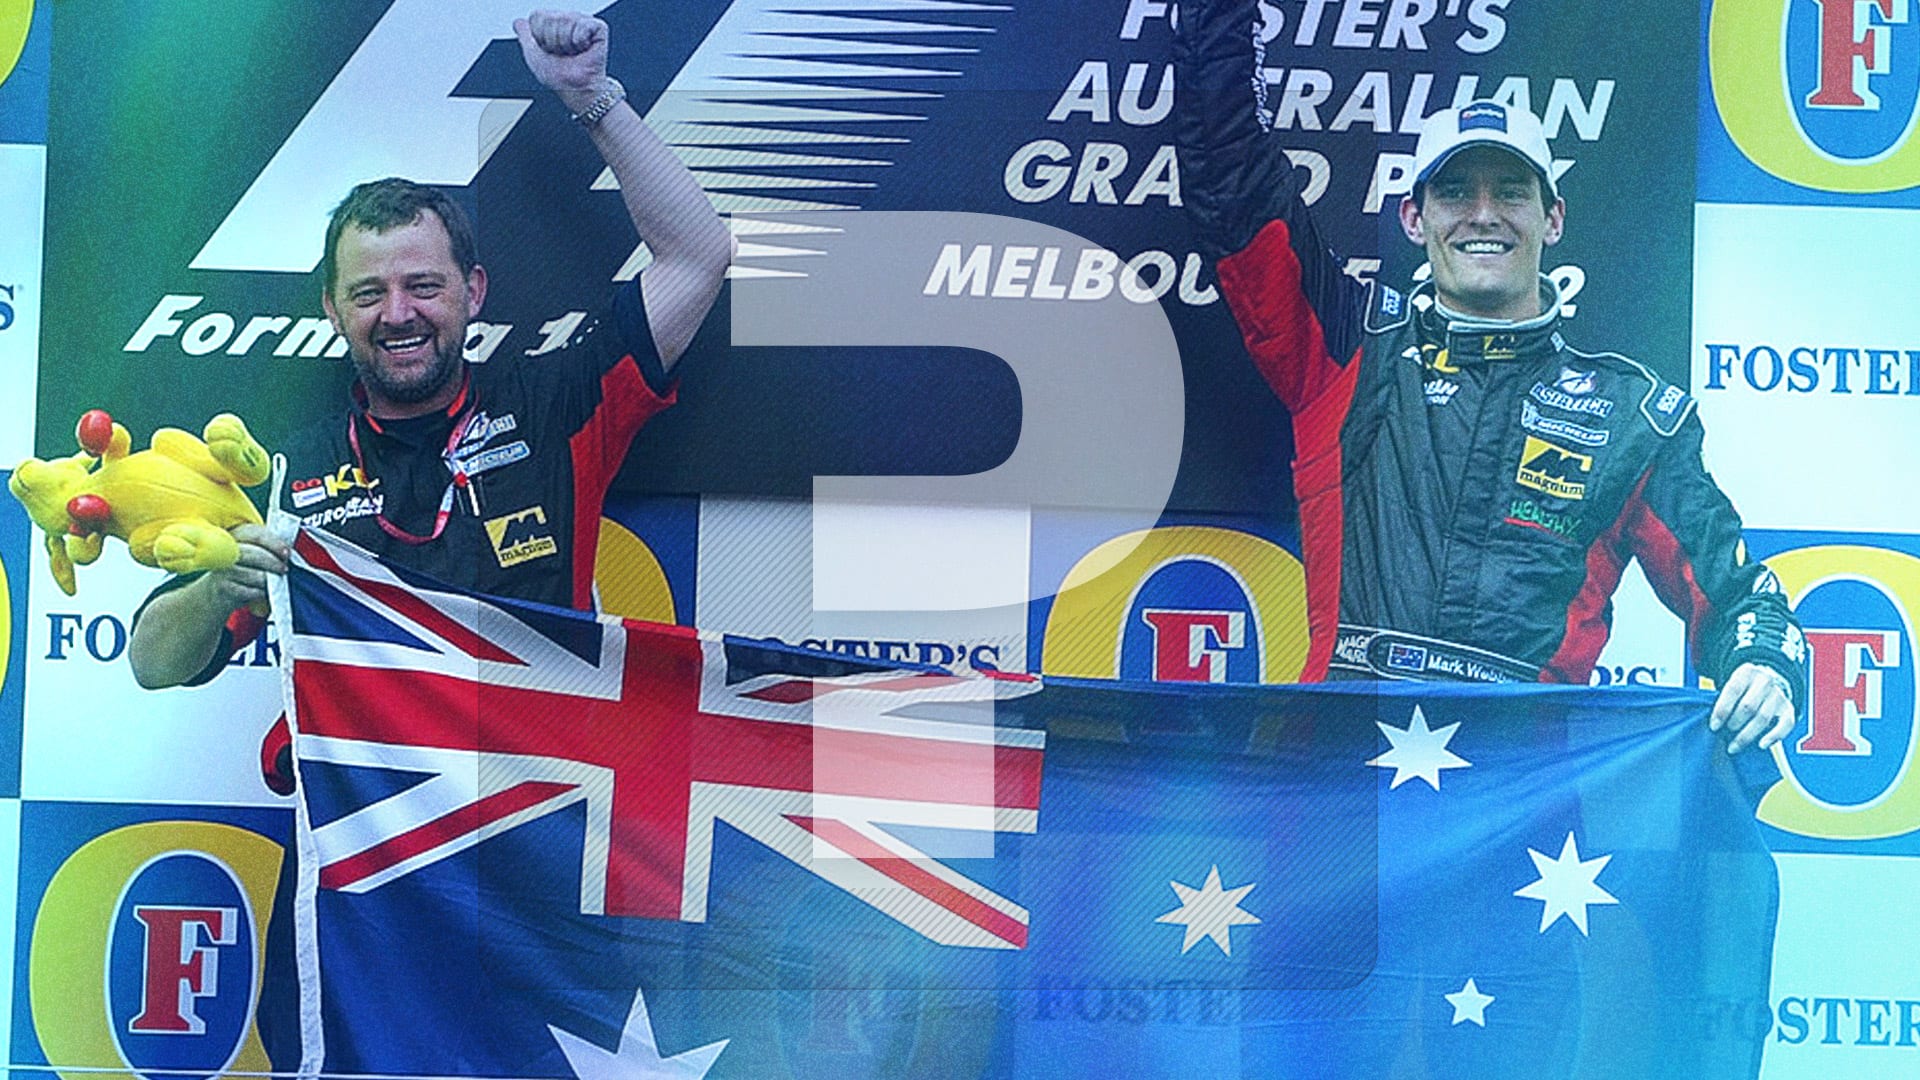 F1 QUIZ: 10 tricky questions on the history of the Australian Grand Prix